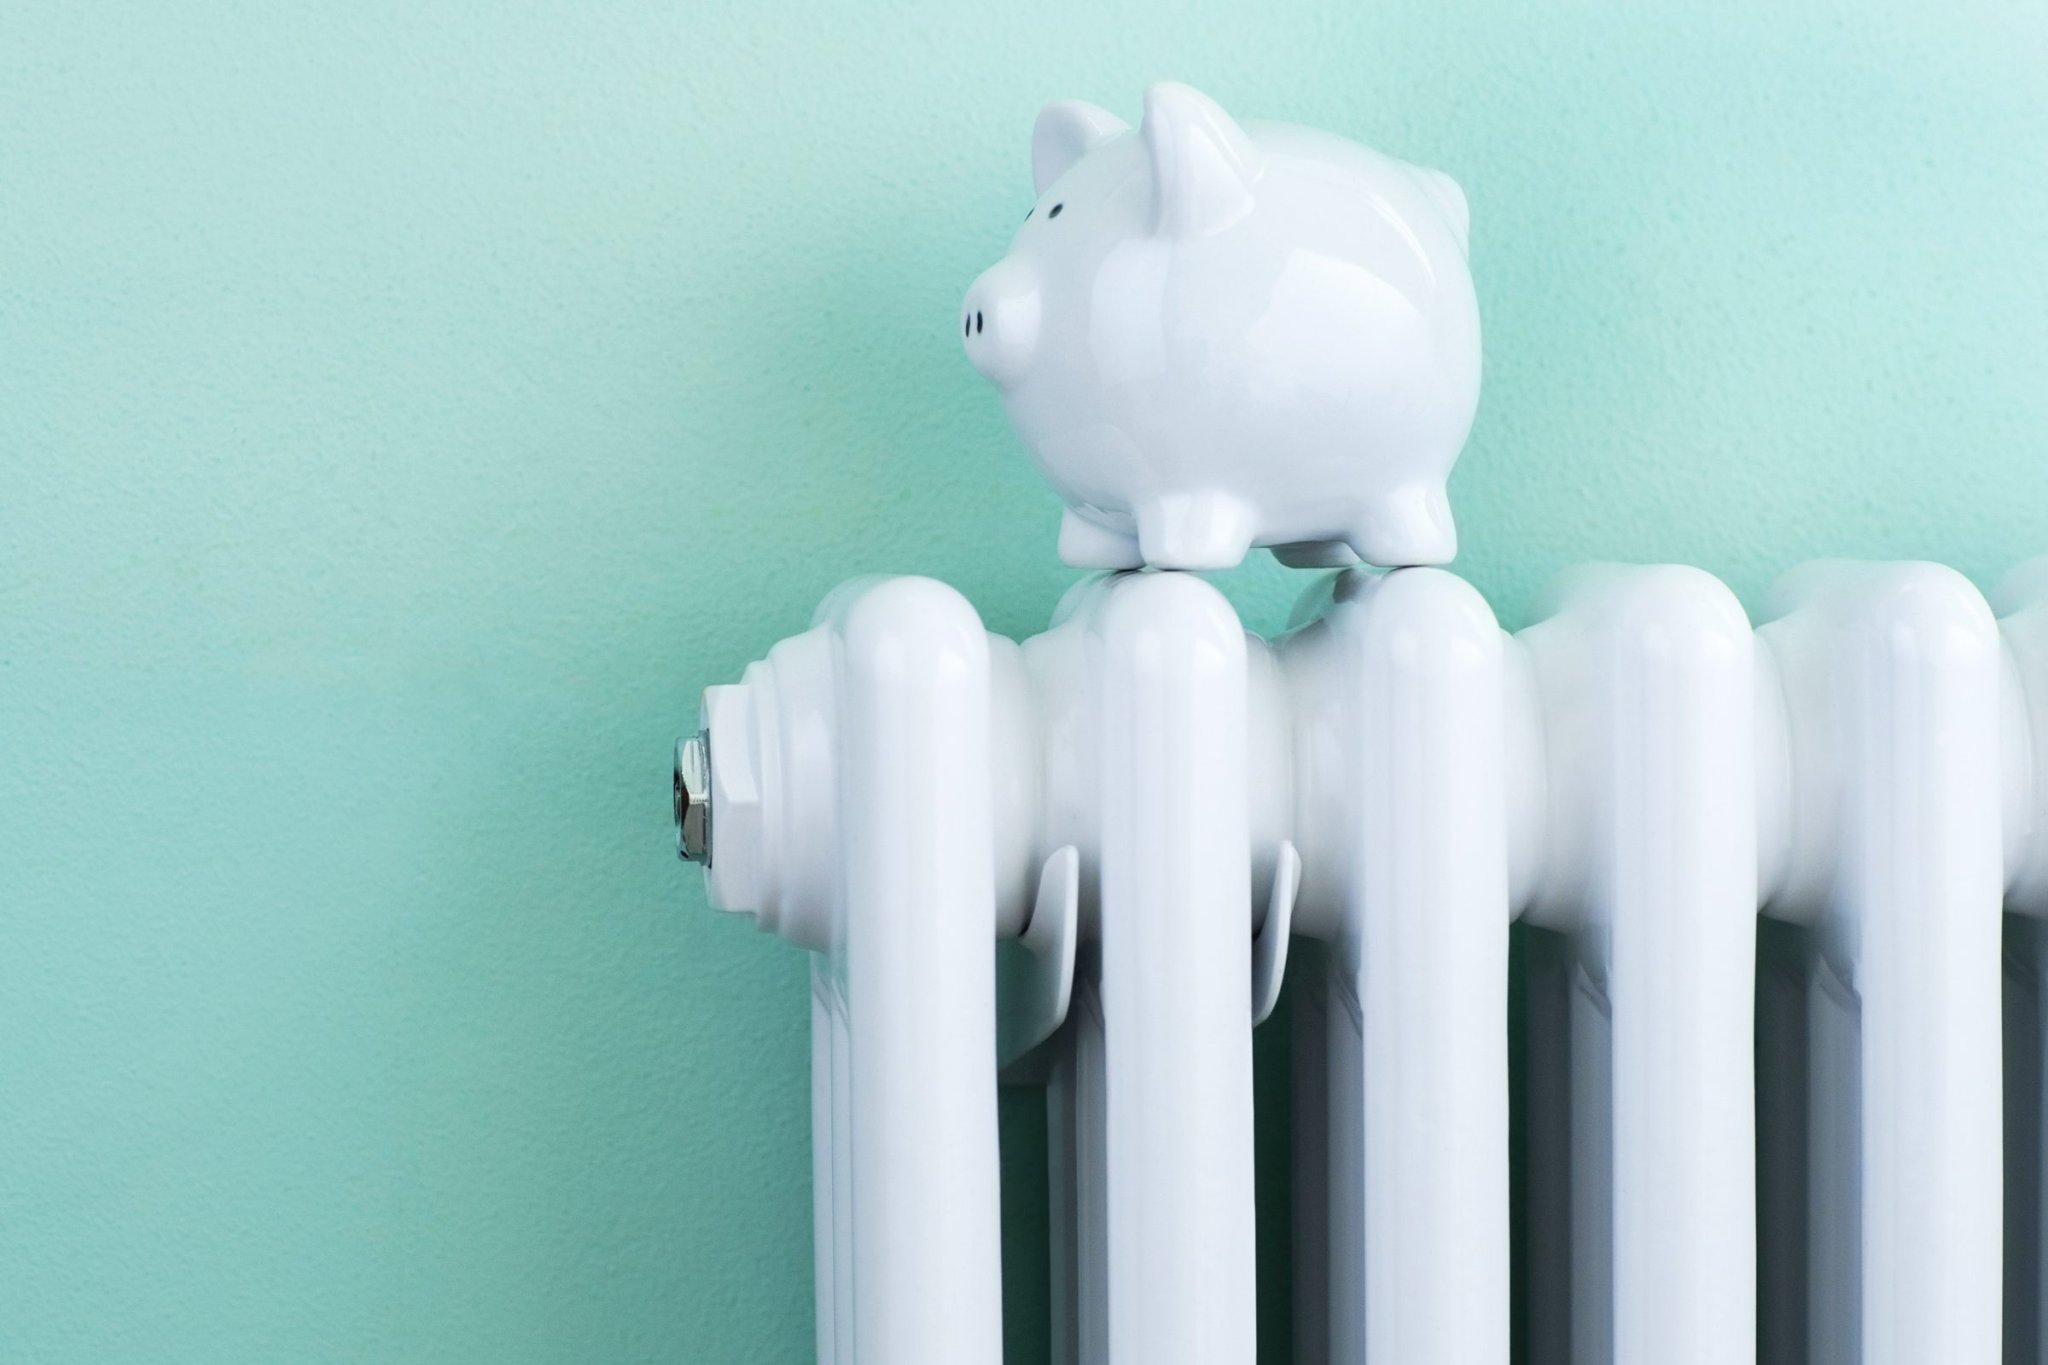 These Are the Most Cost-Effective Energy Efficiency Tips